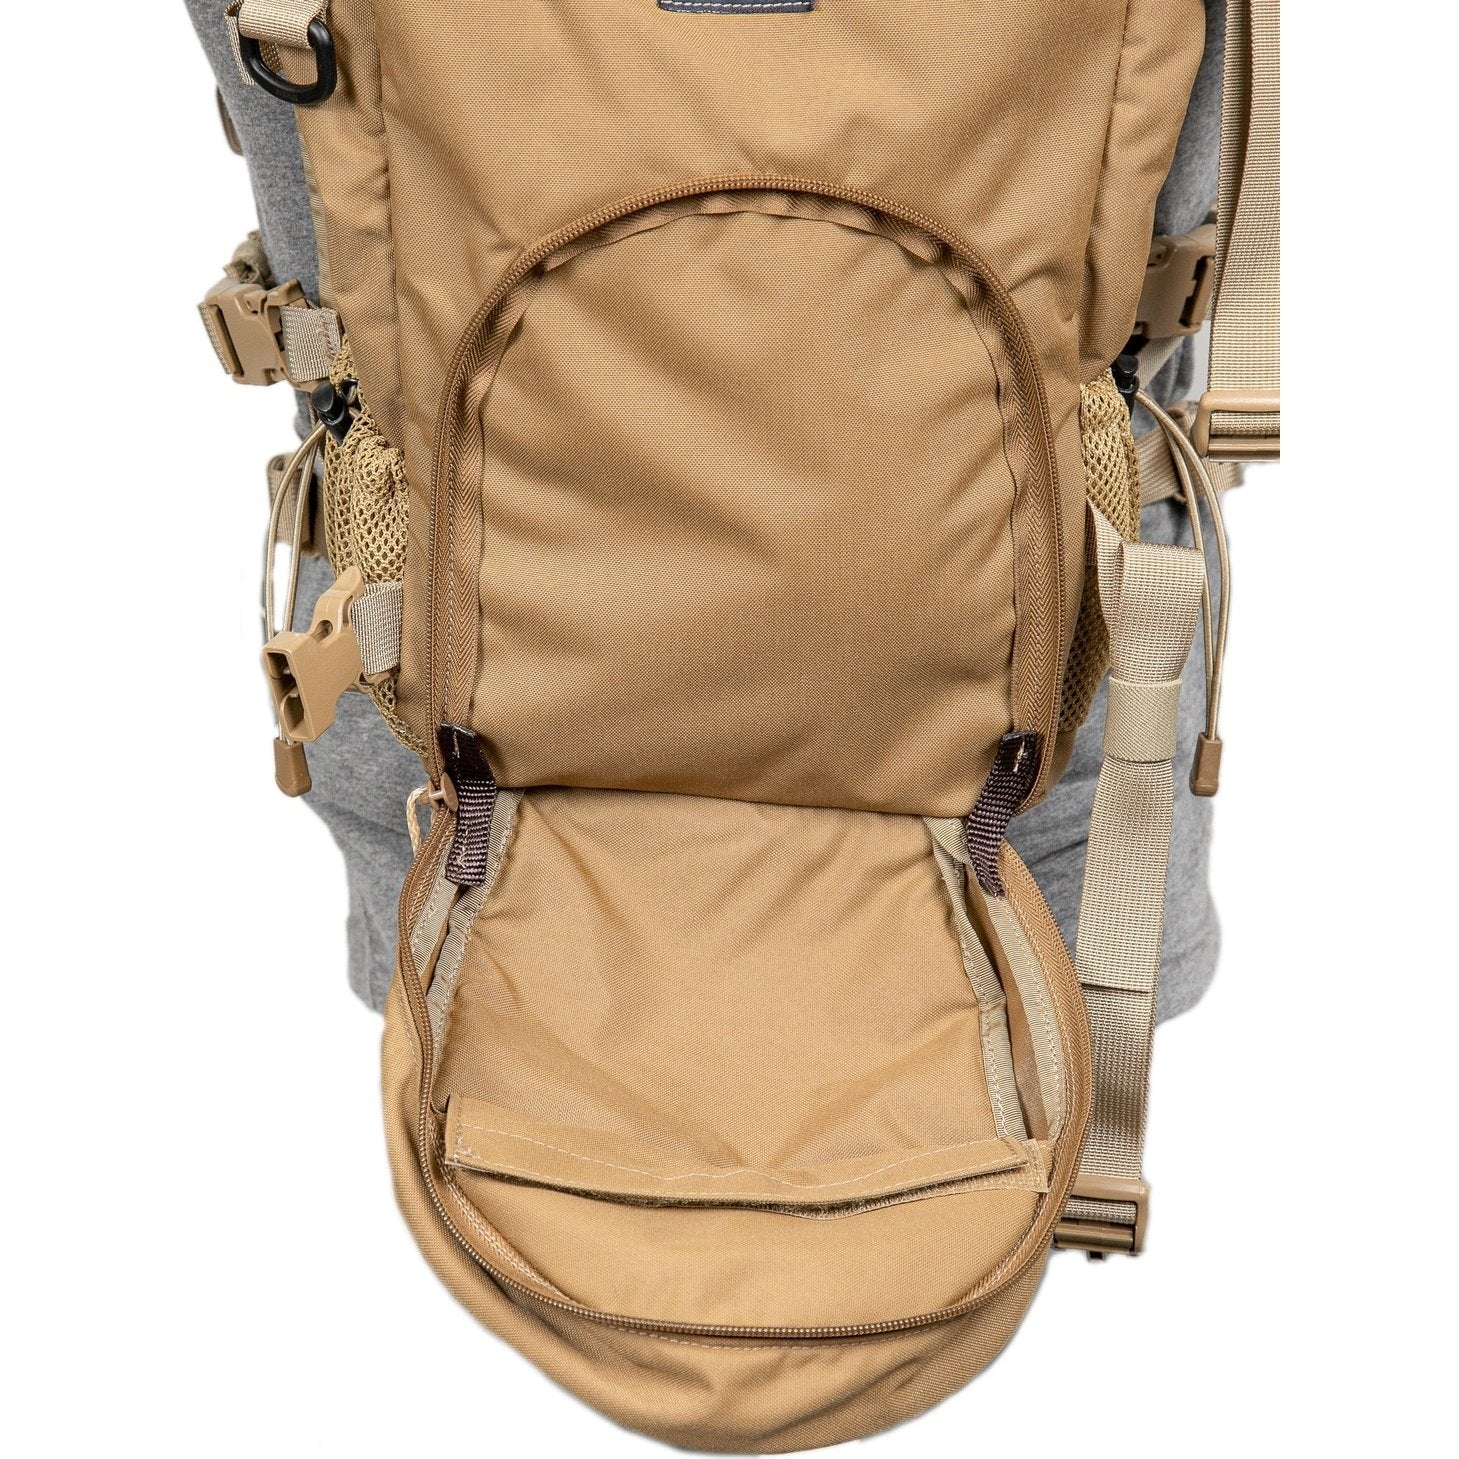 Scout - AGC Backpack Alaska Guide Creations 